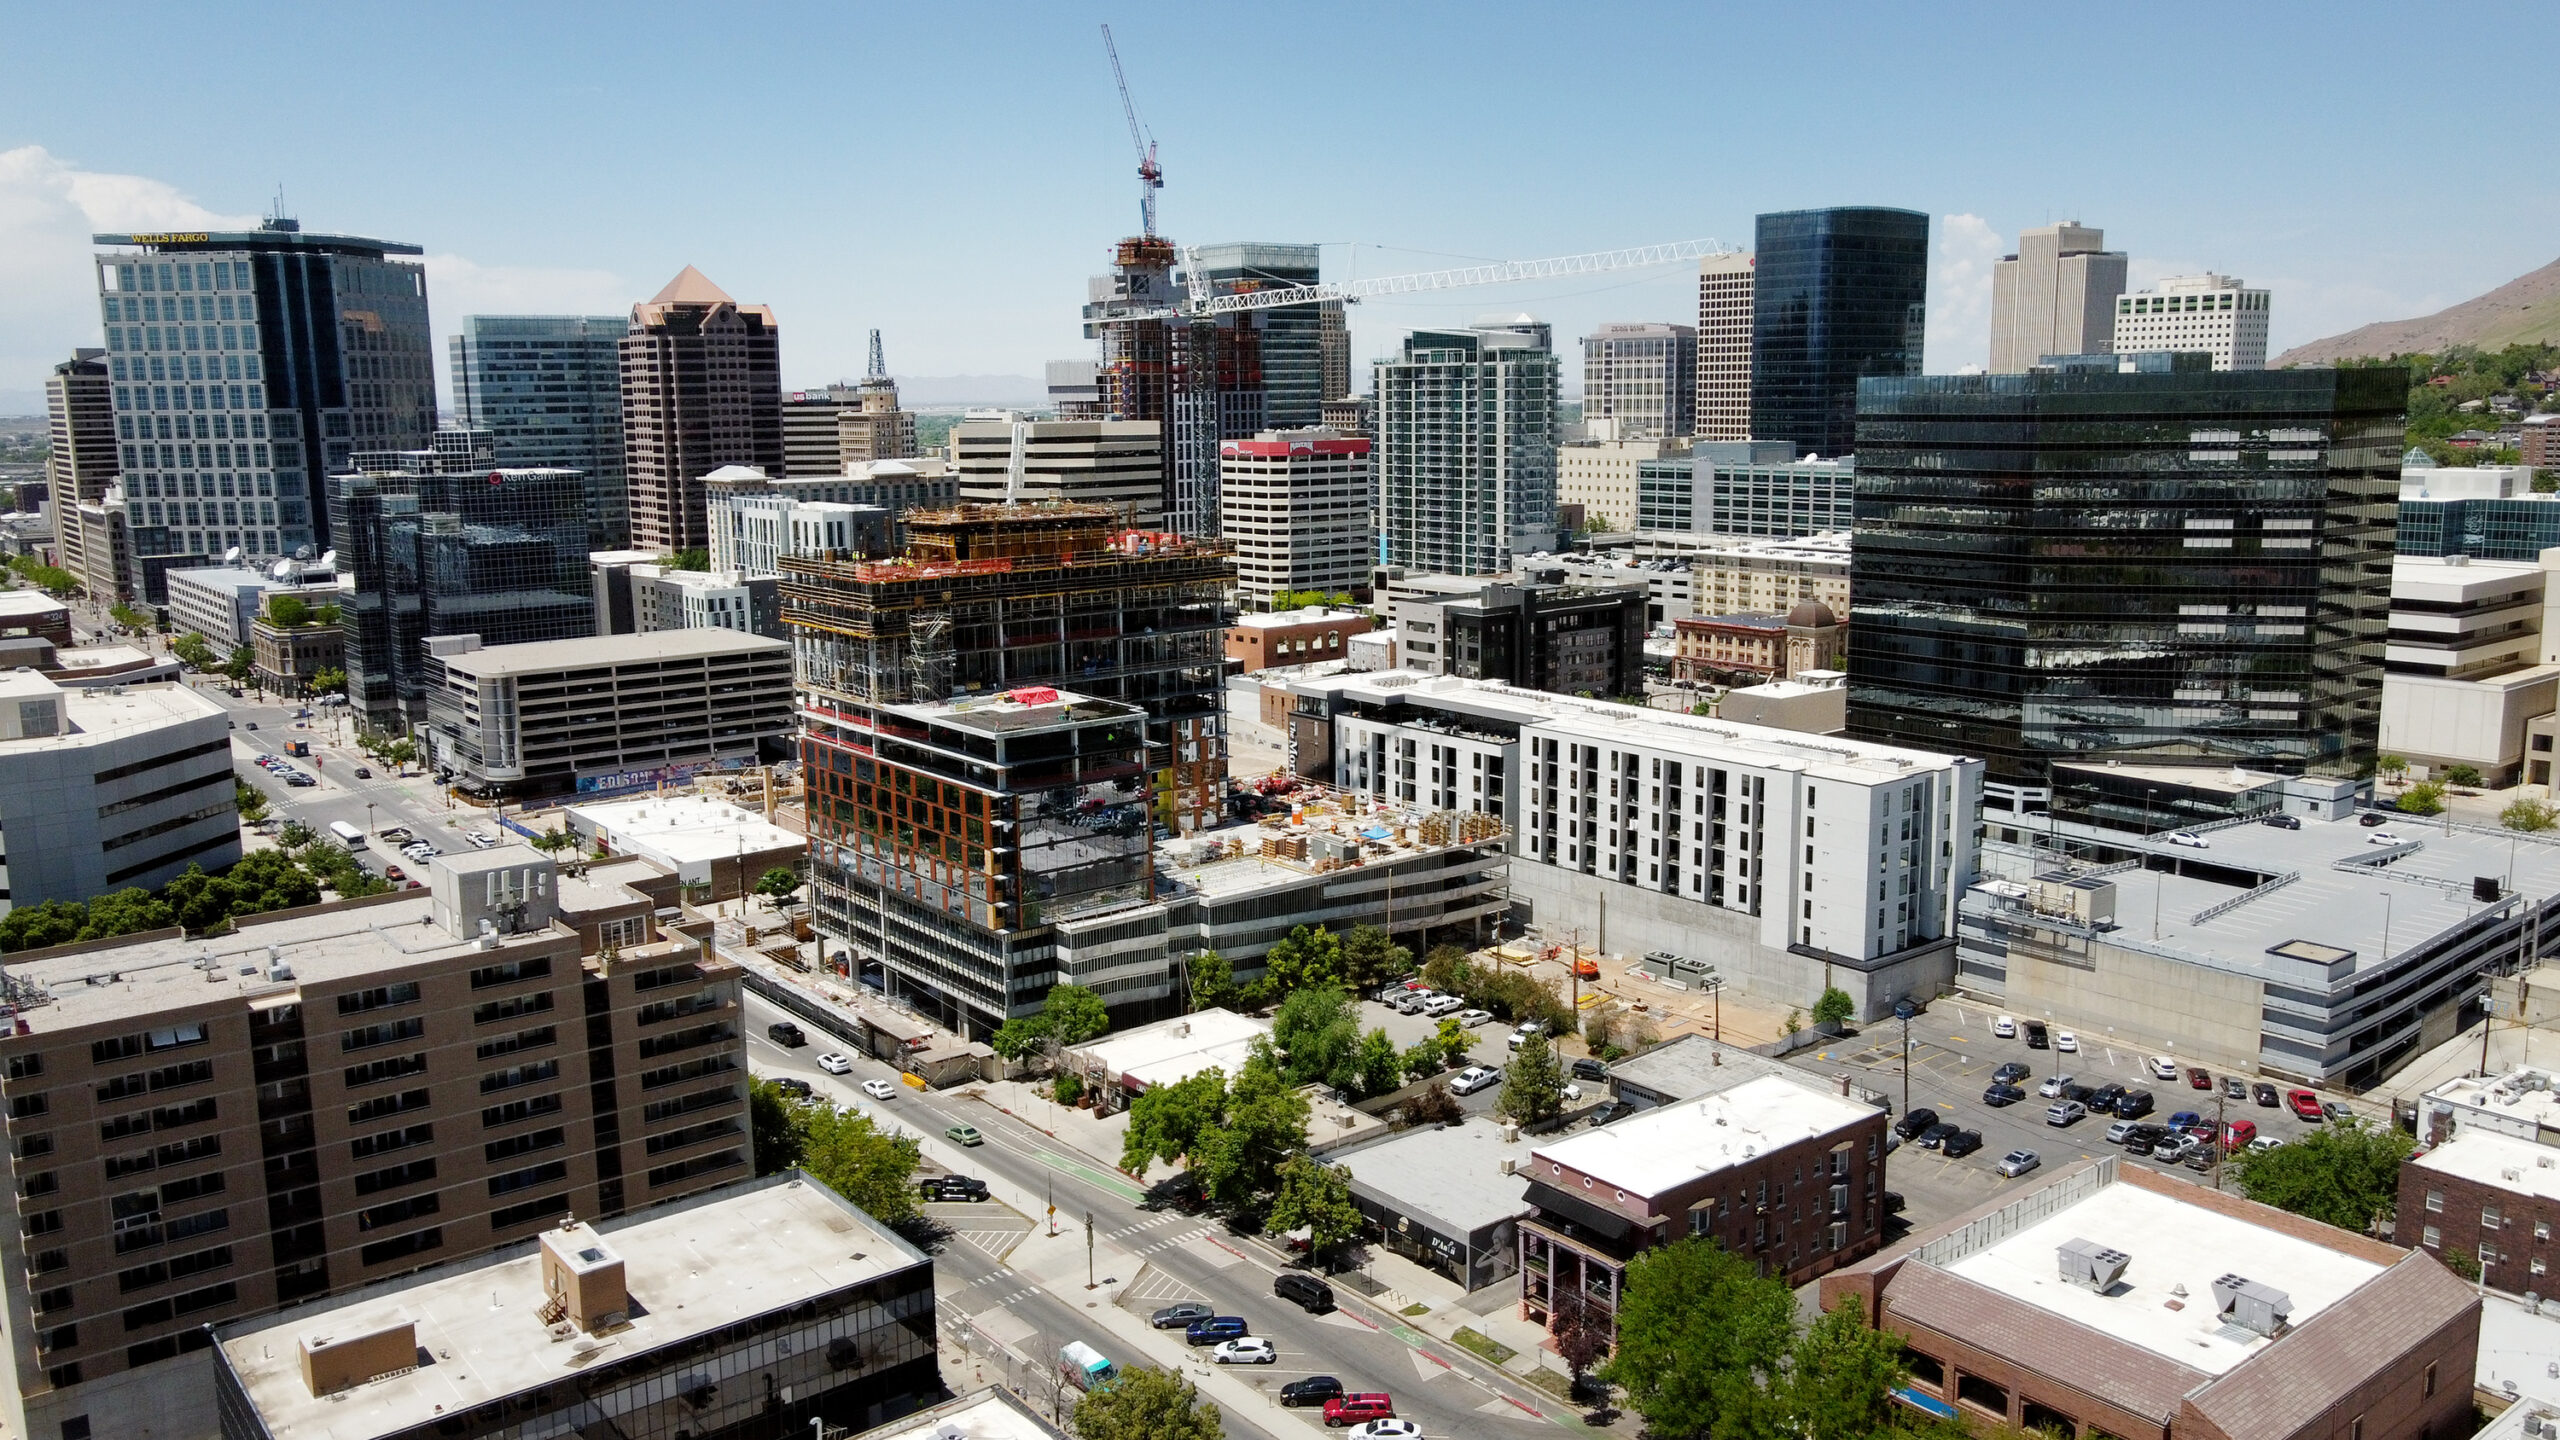 Salt Lake City leaders have drafted a five-year housing plan to build 10,000 new housing units by t...